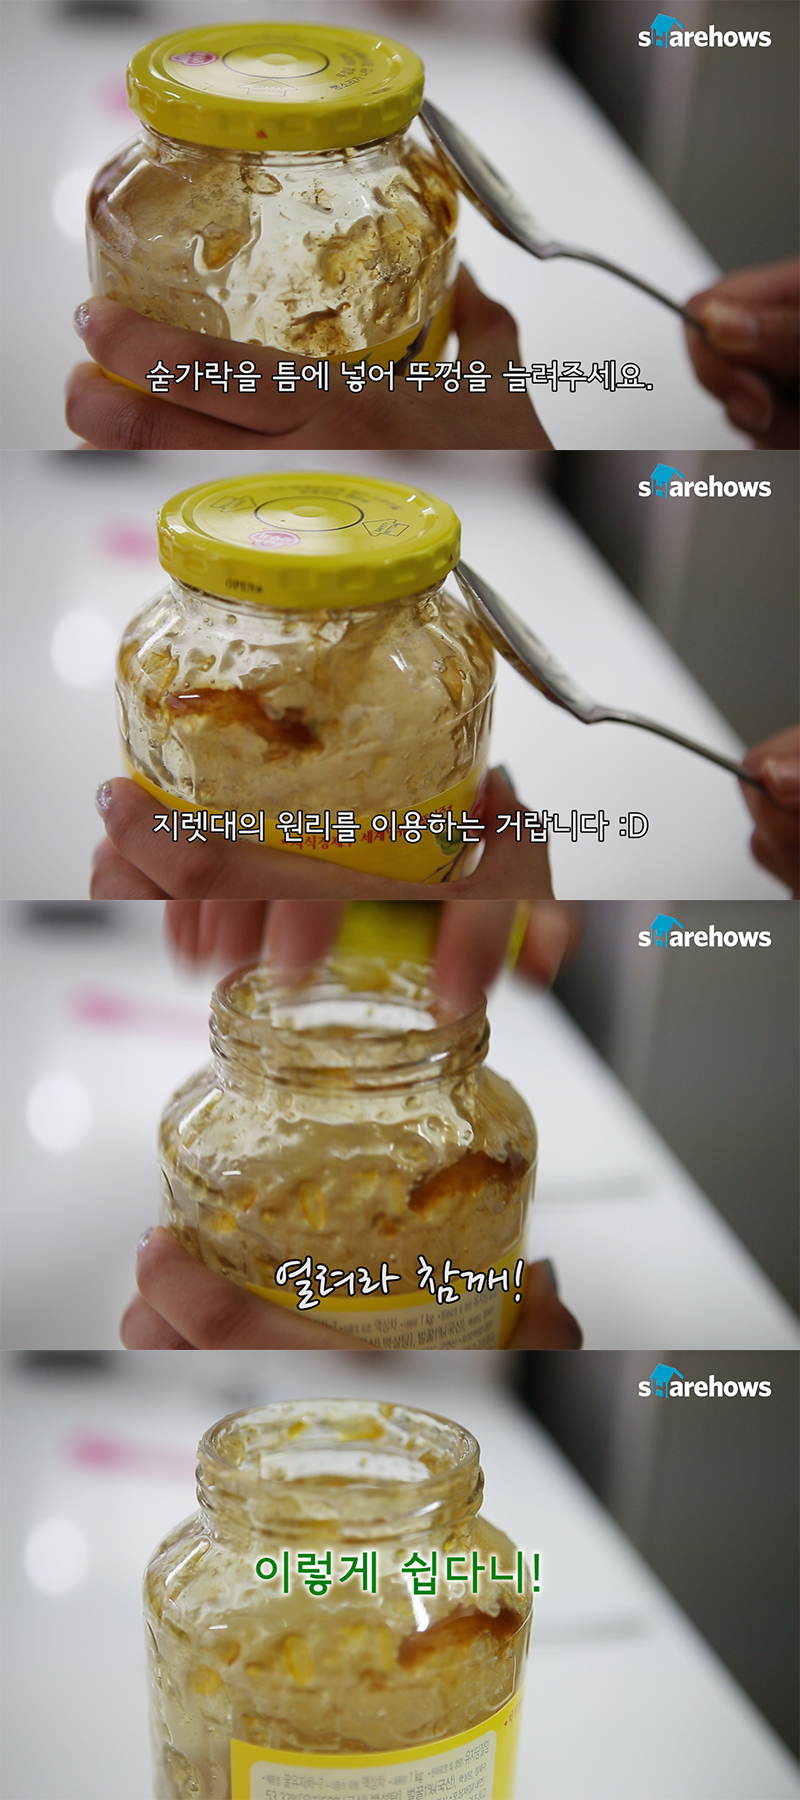 how-to-open-a-jar 03